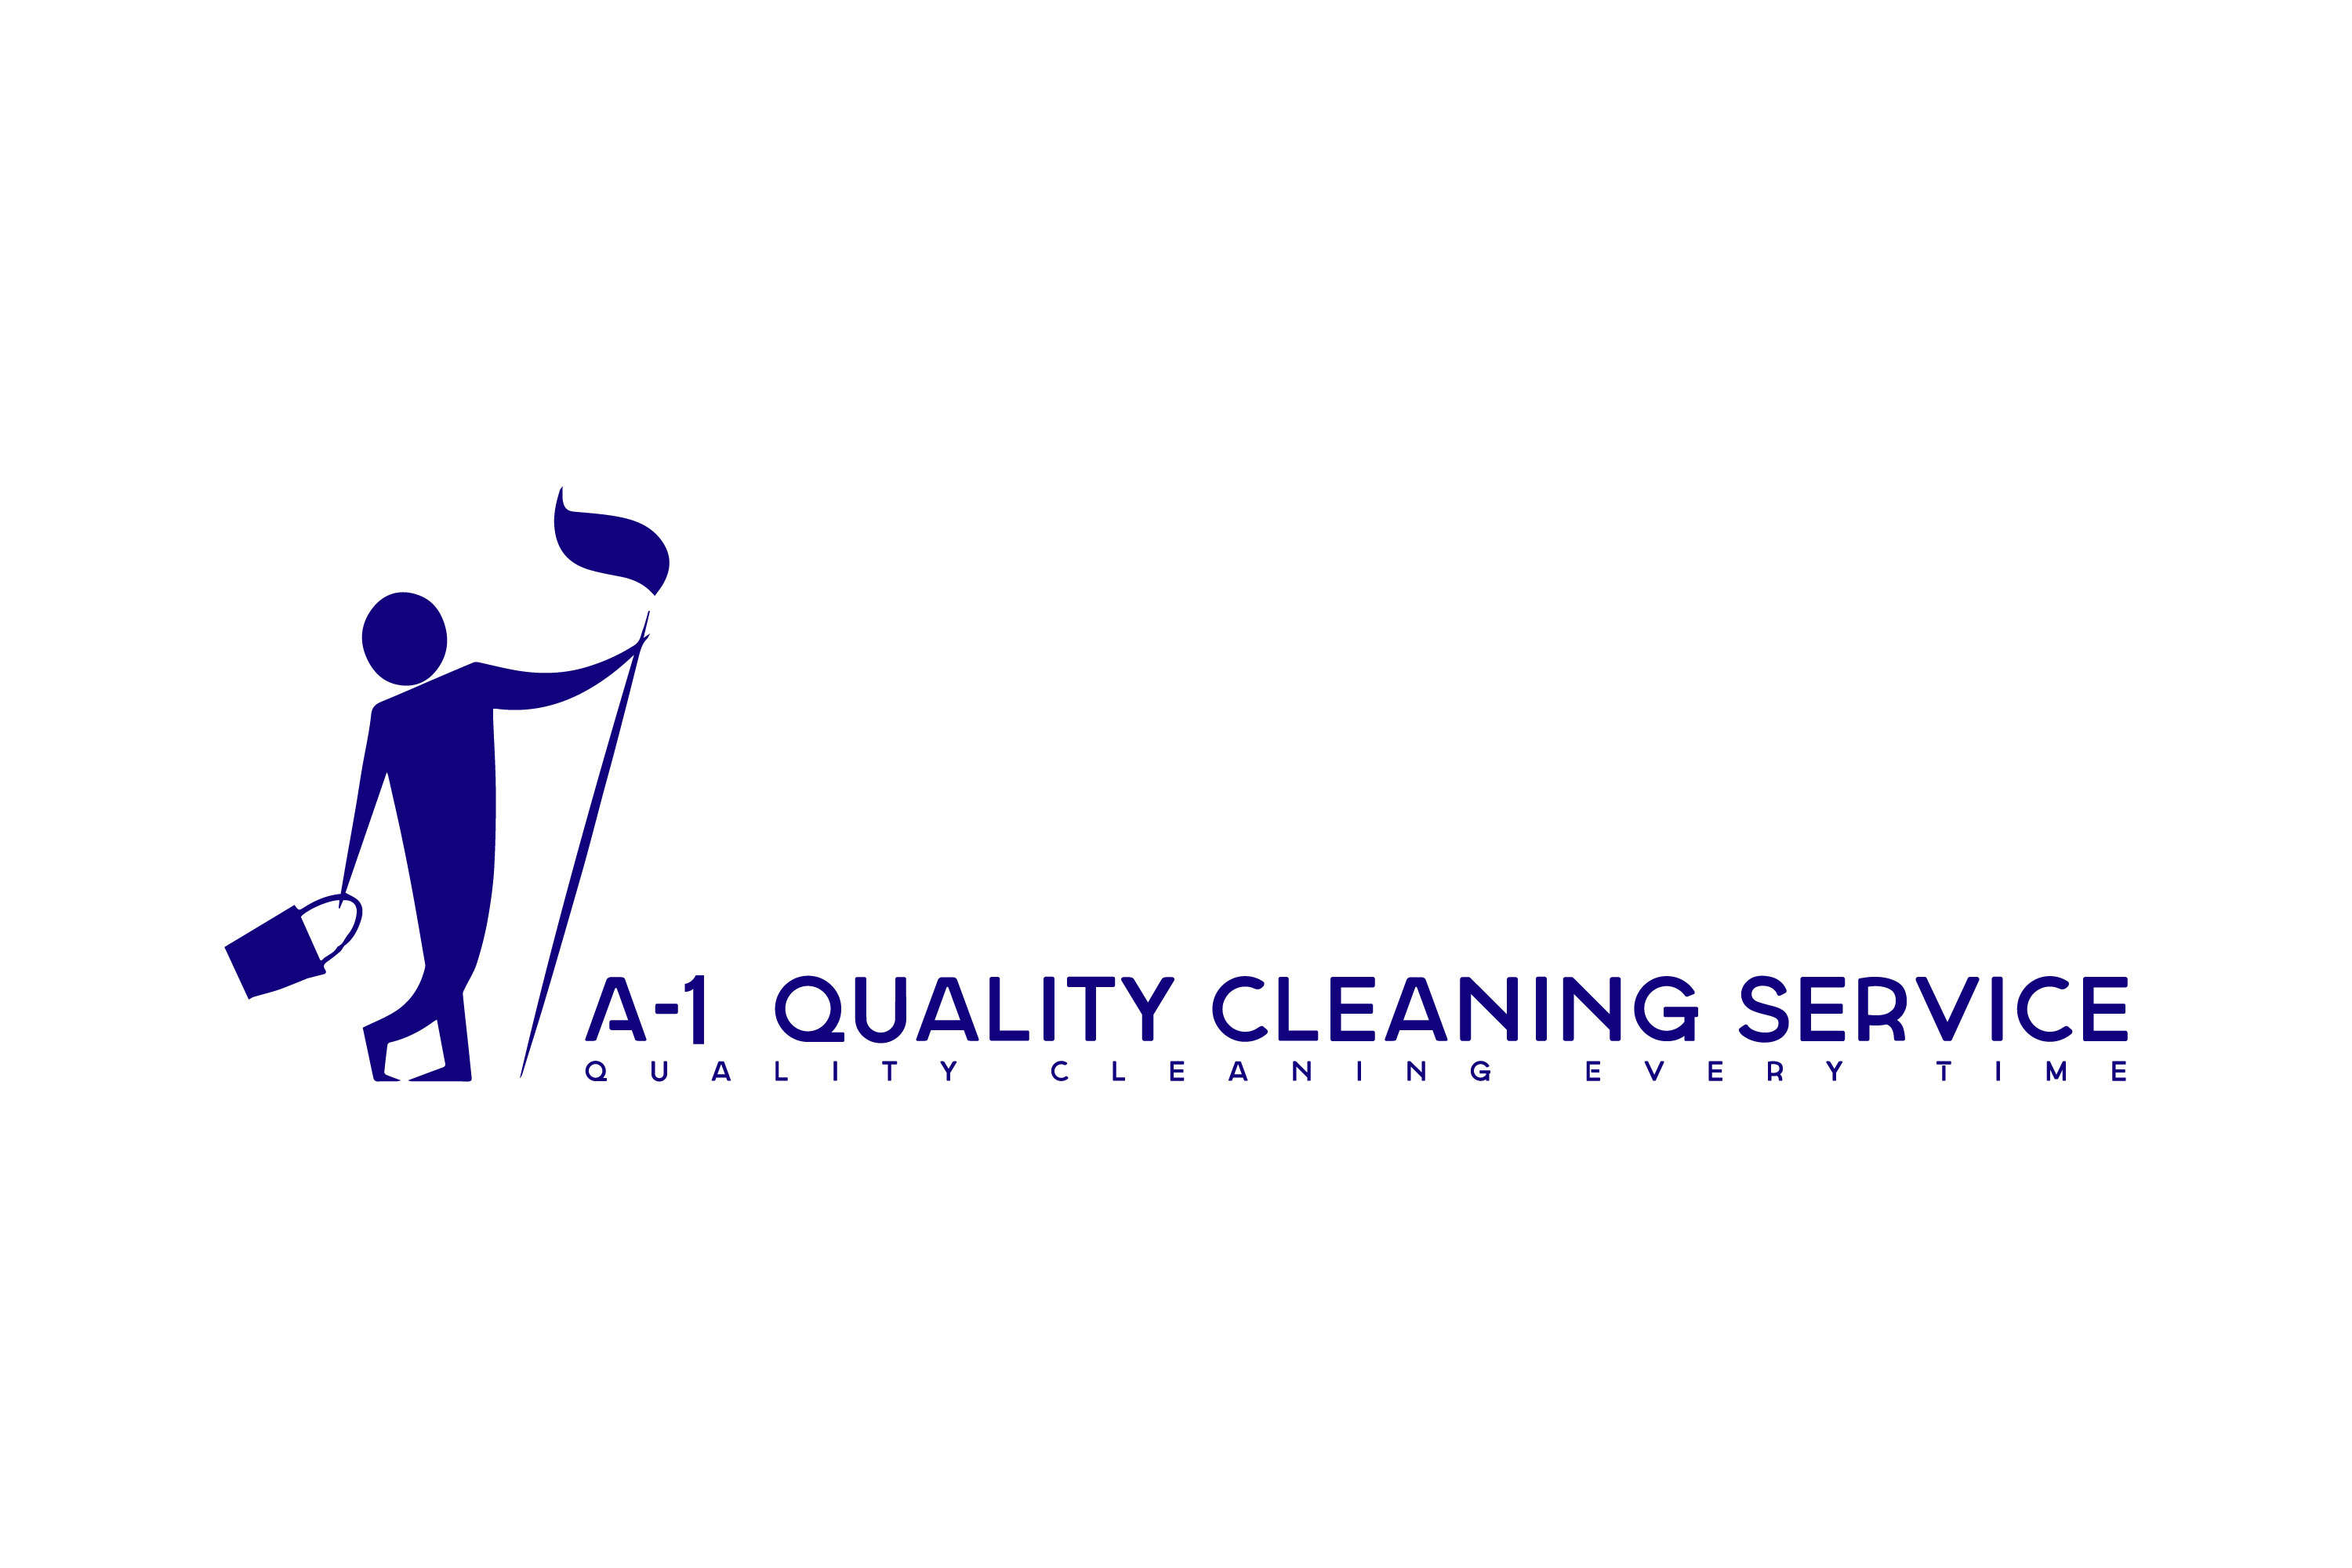 A-1 Quality Cleaning Service, Inc. Logo